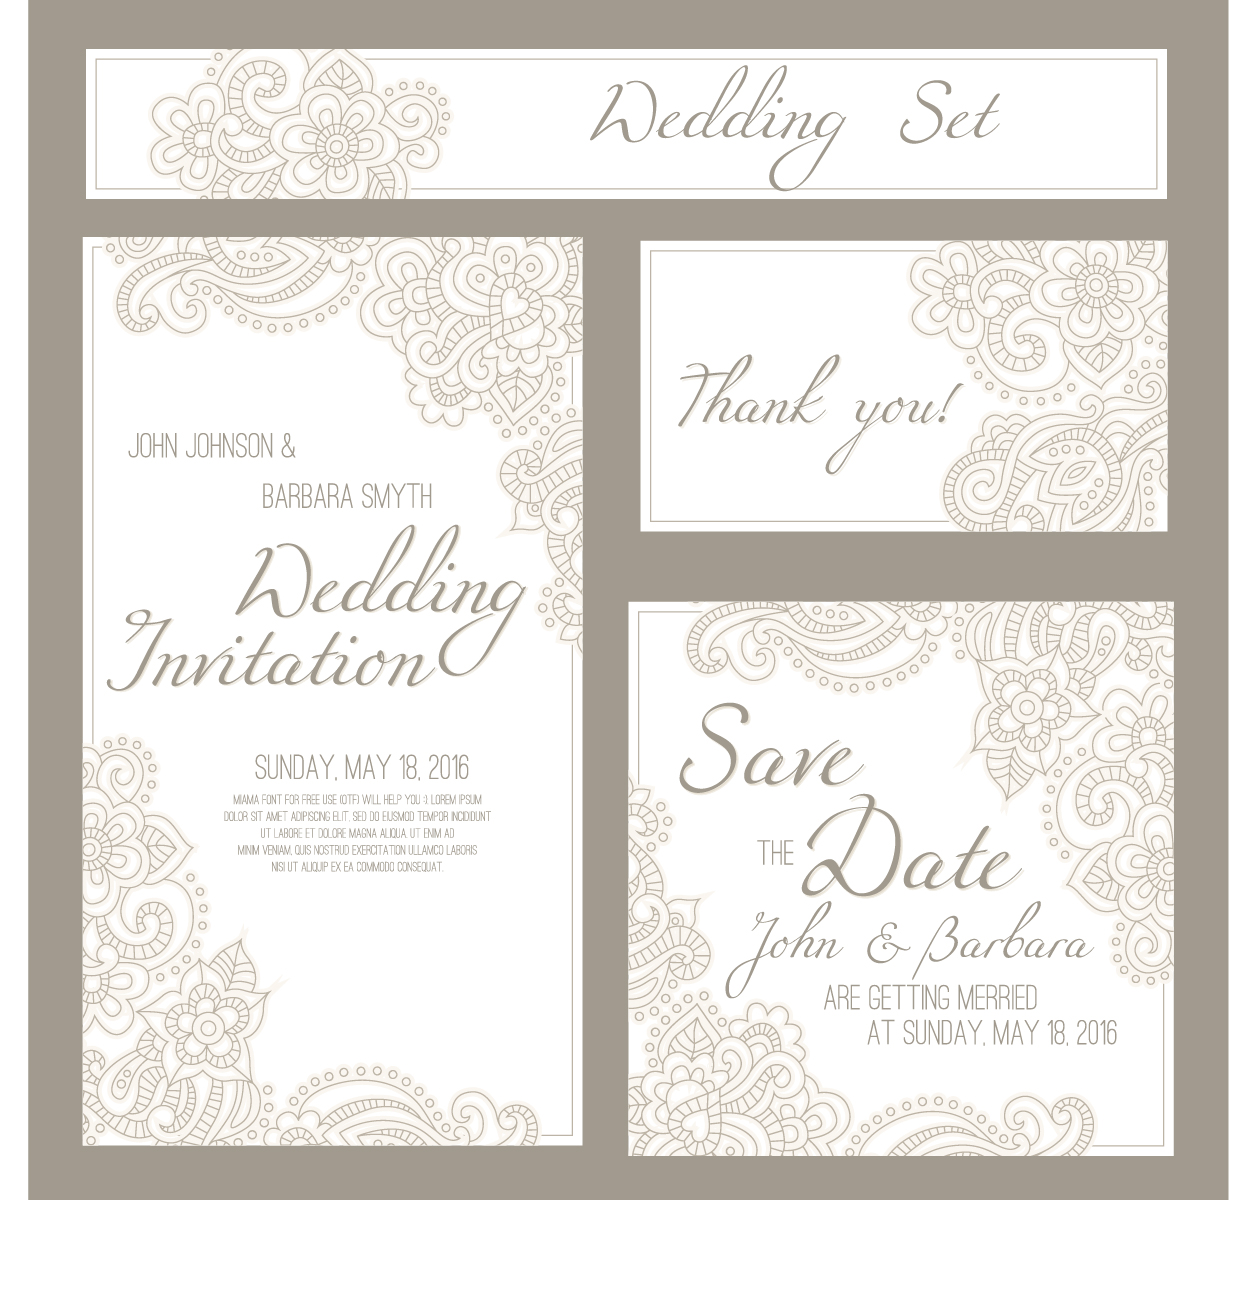 Wedding invitation card with banner vector  